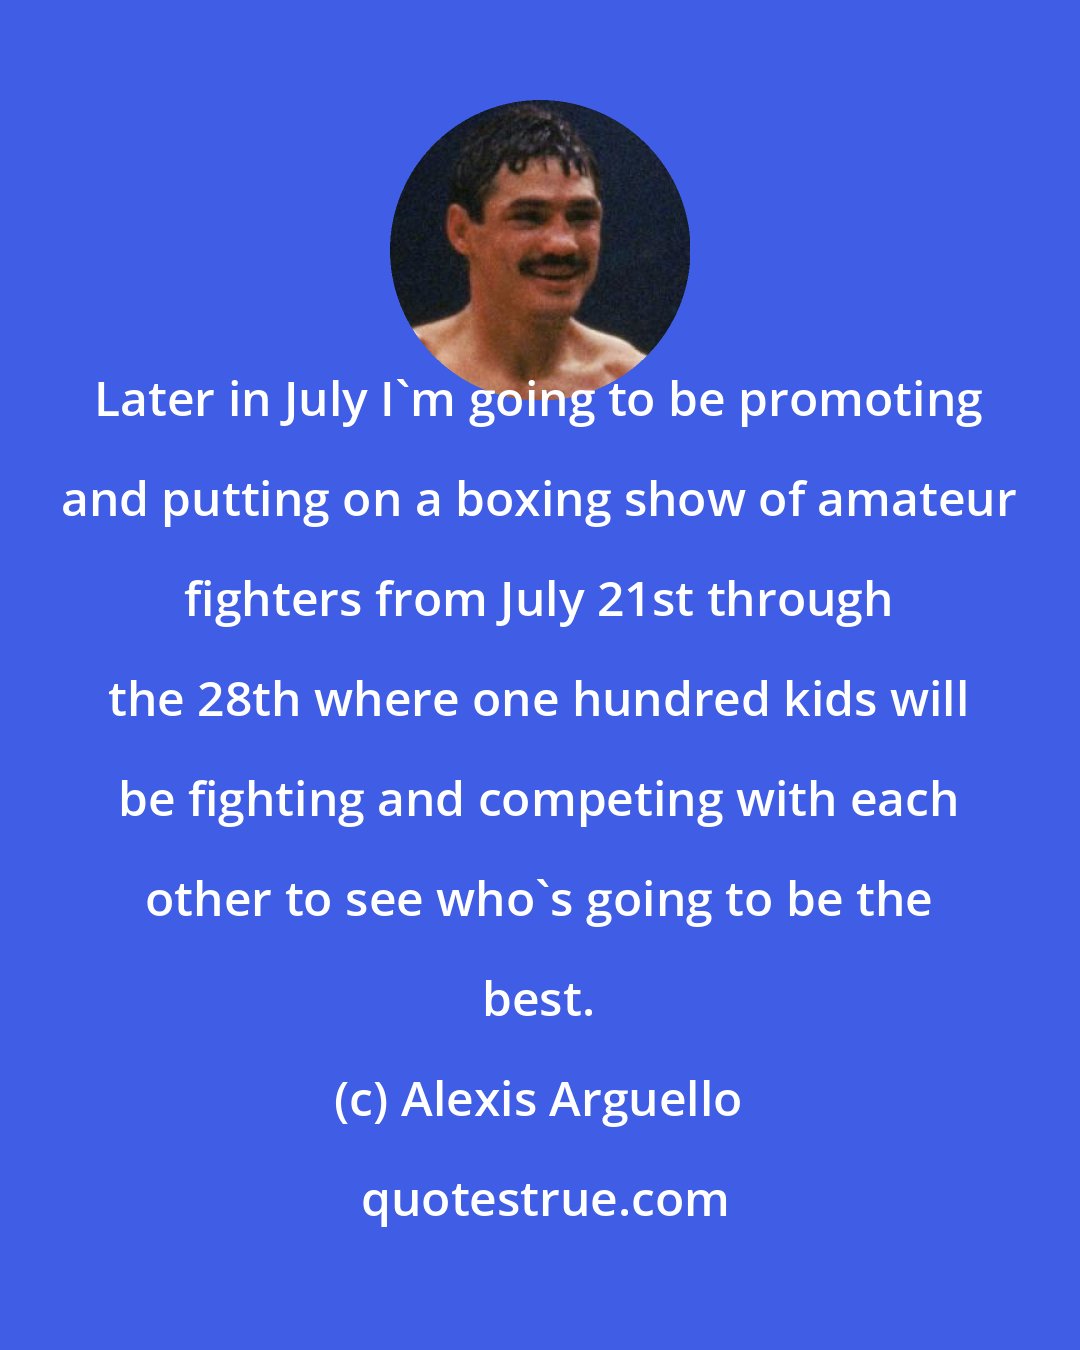 Alexis Arguello: Later in July I'm going to be promoting and putting on a boxing show of amateur fighters from July 21st through the 28th where one hundred kids will be fighting and competing with each other to see who's going to be the best.